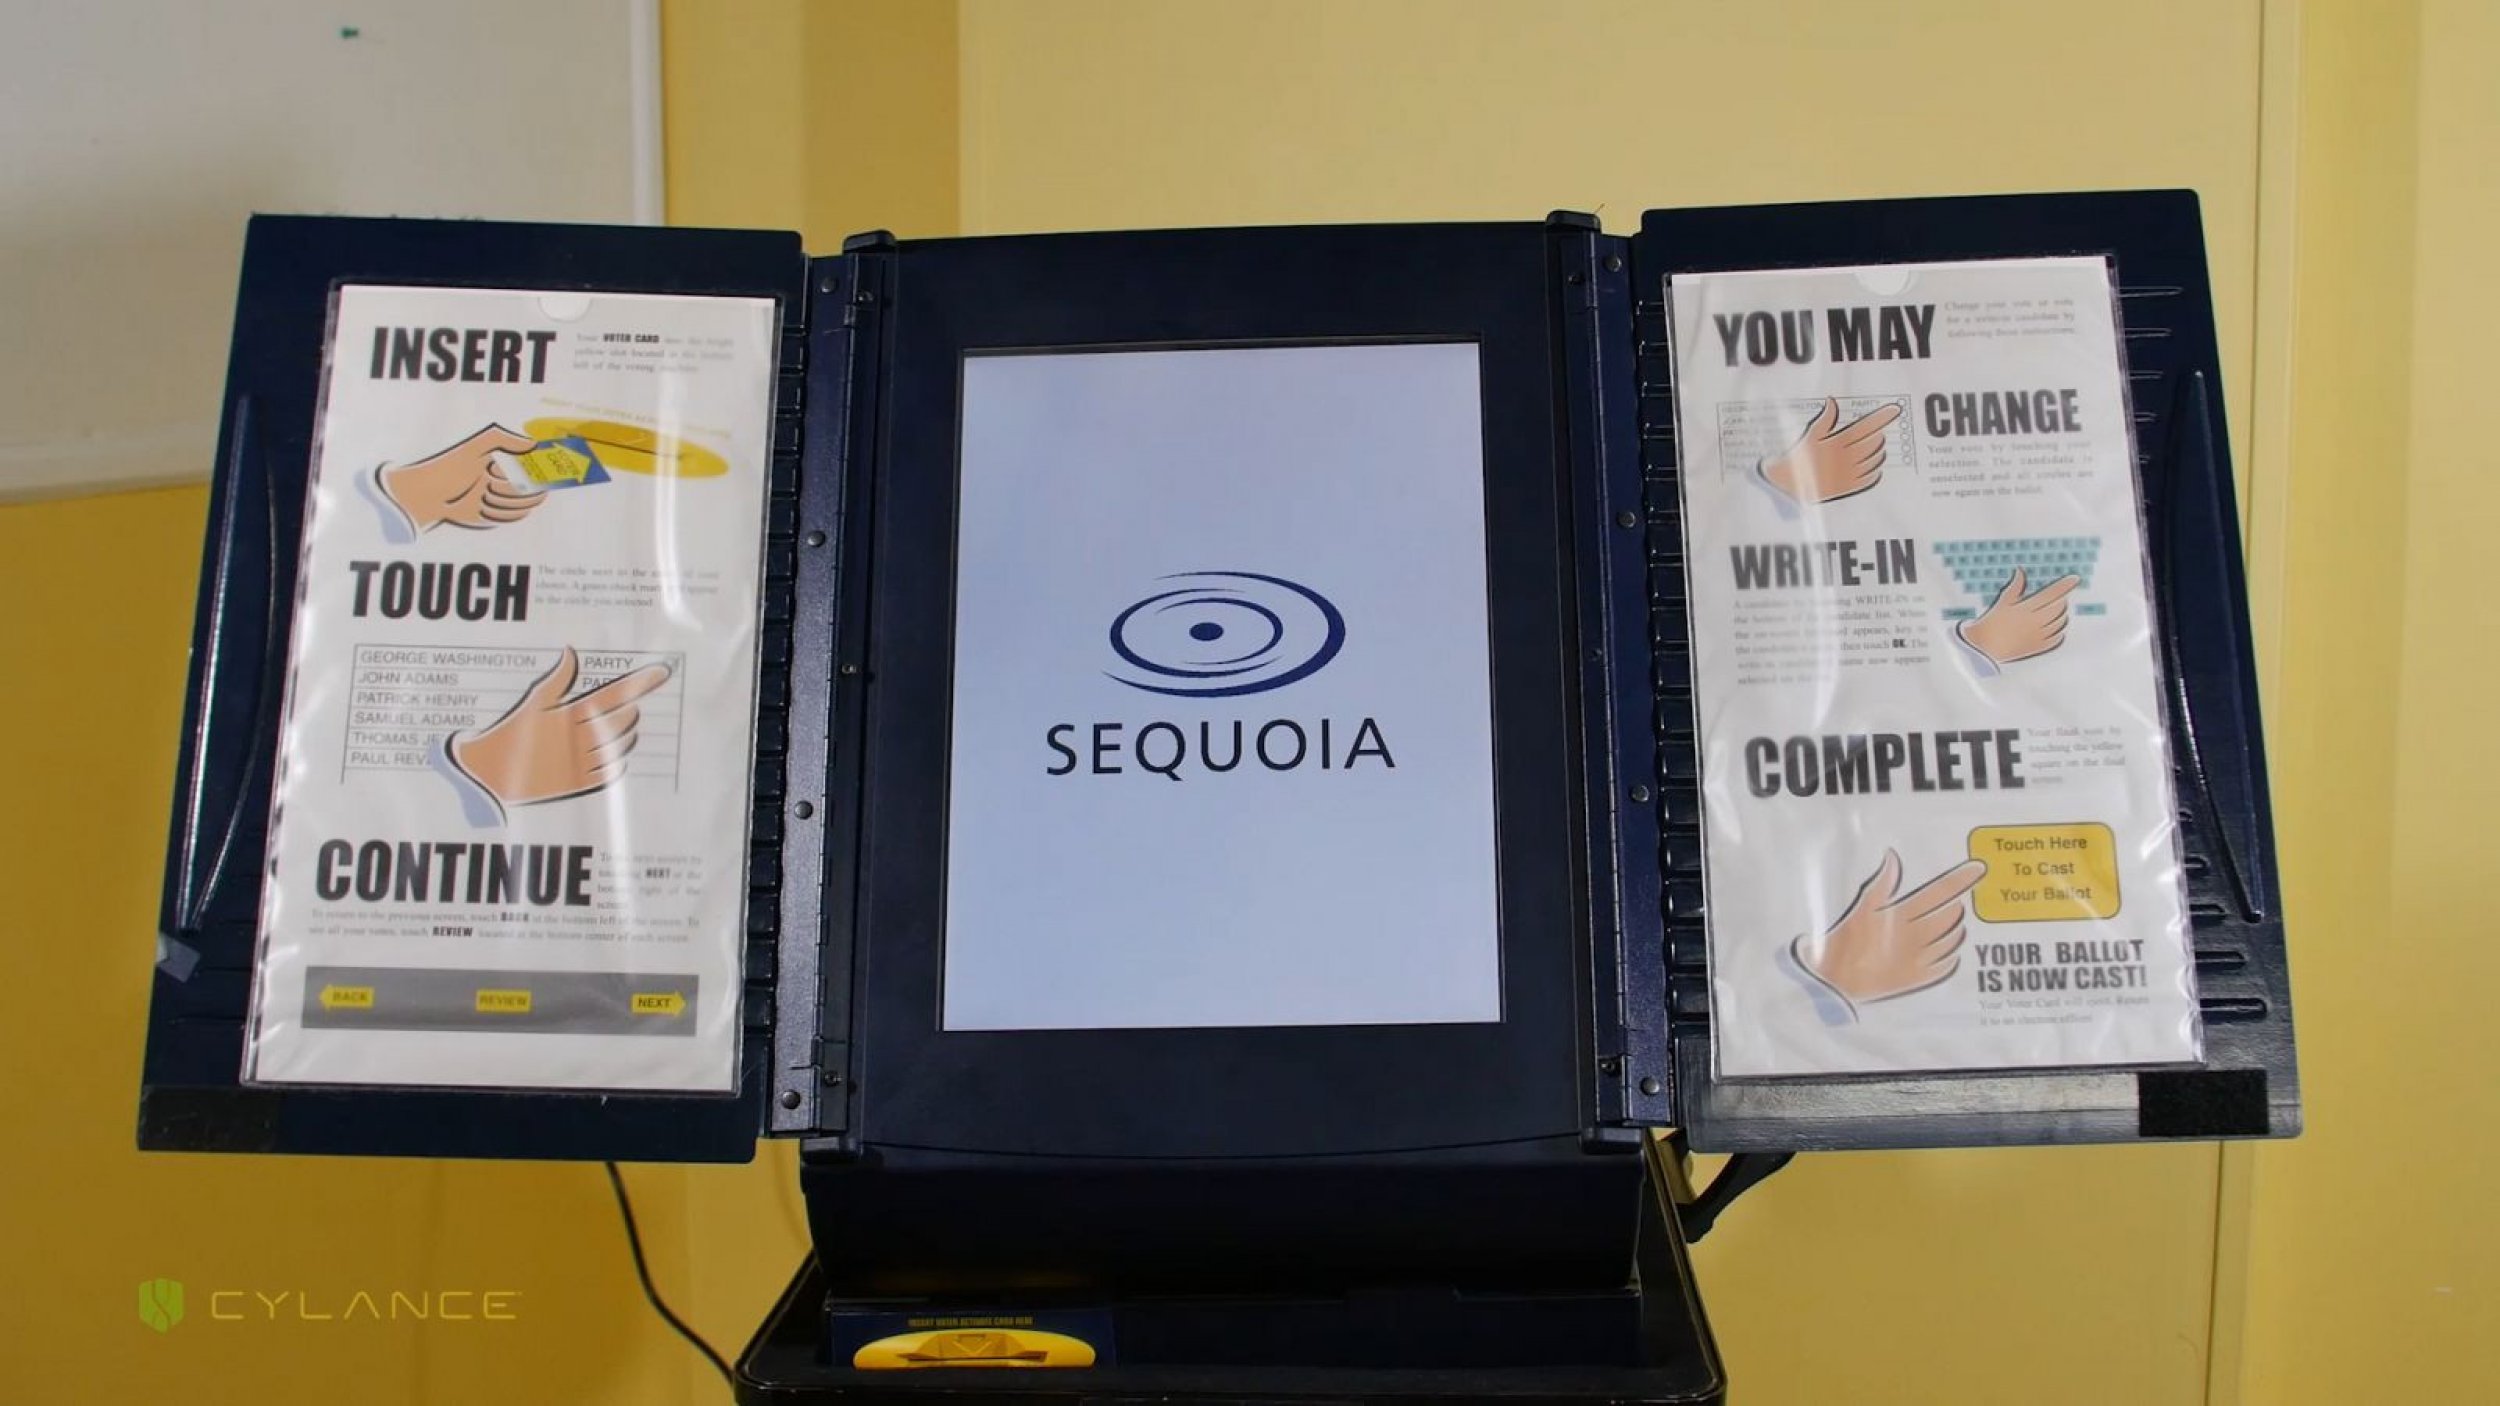 How Easy Is It To Hack A Voting Machine